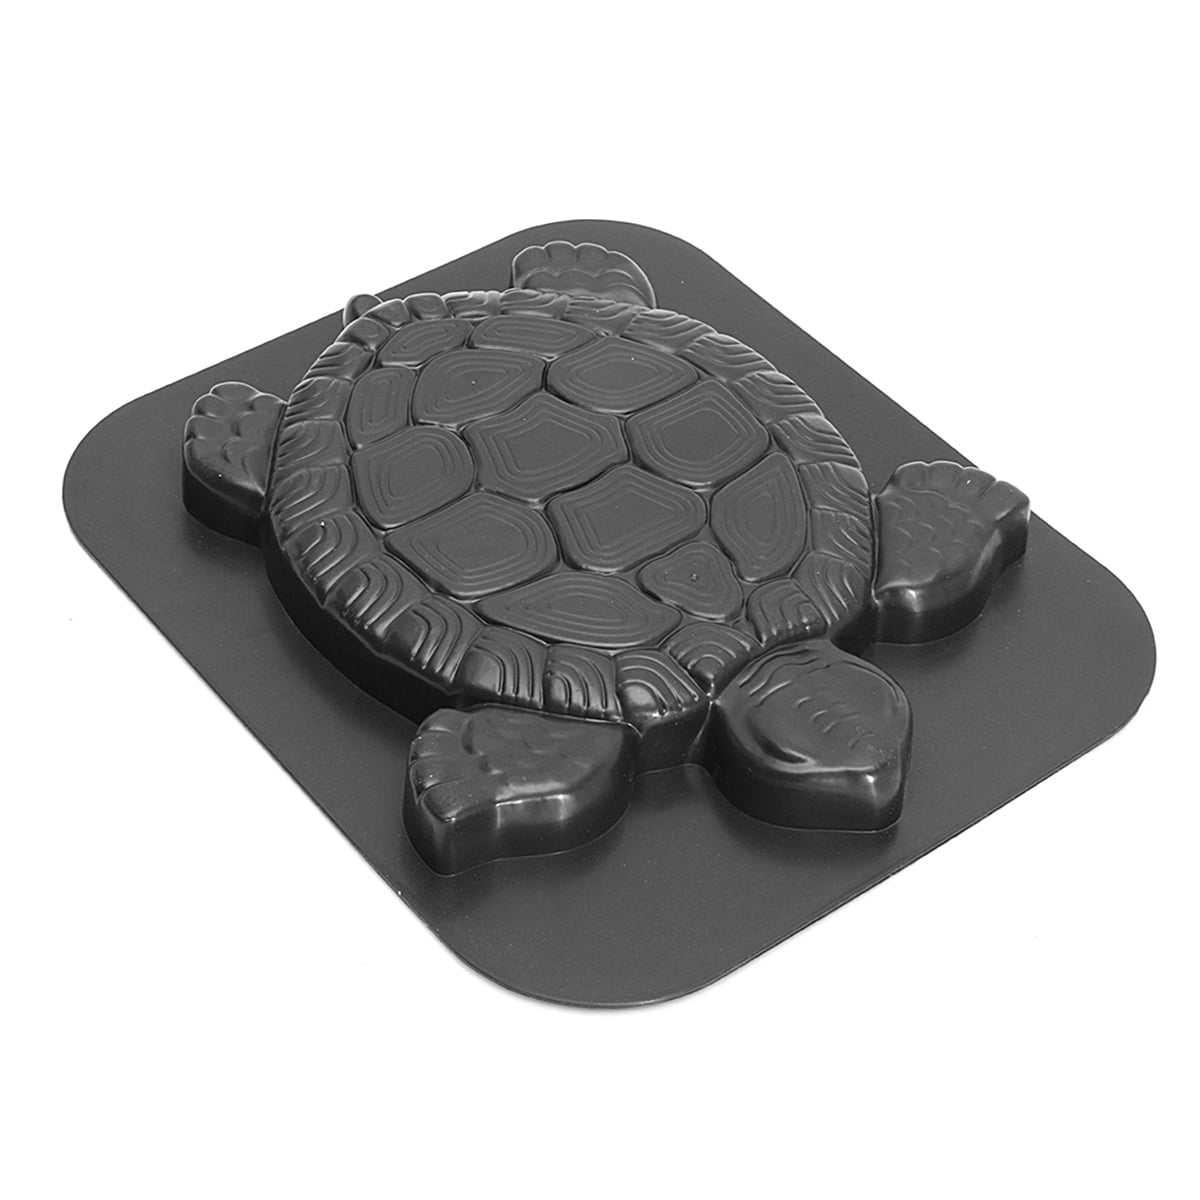 Turtle stepping stone mold plaster concrete mould 13" x 2" thick 